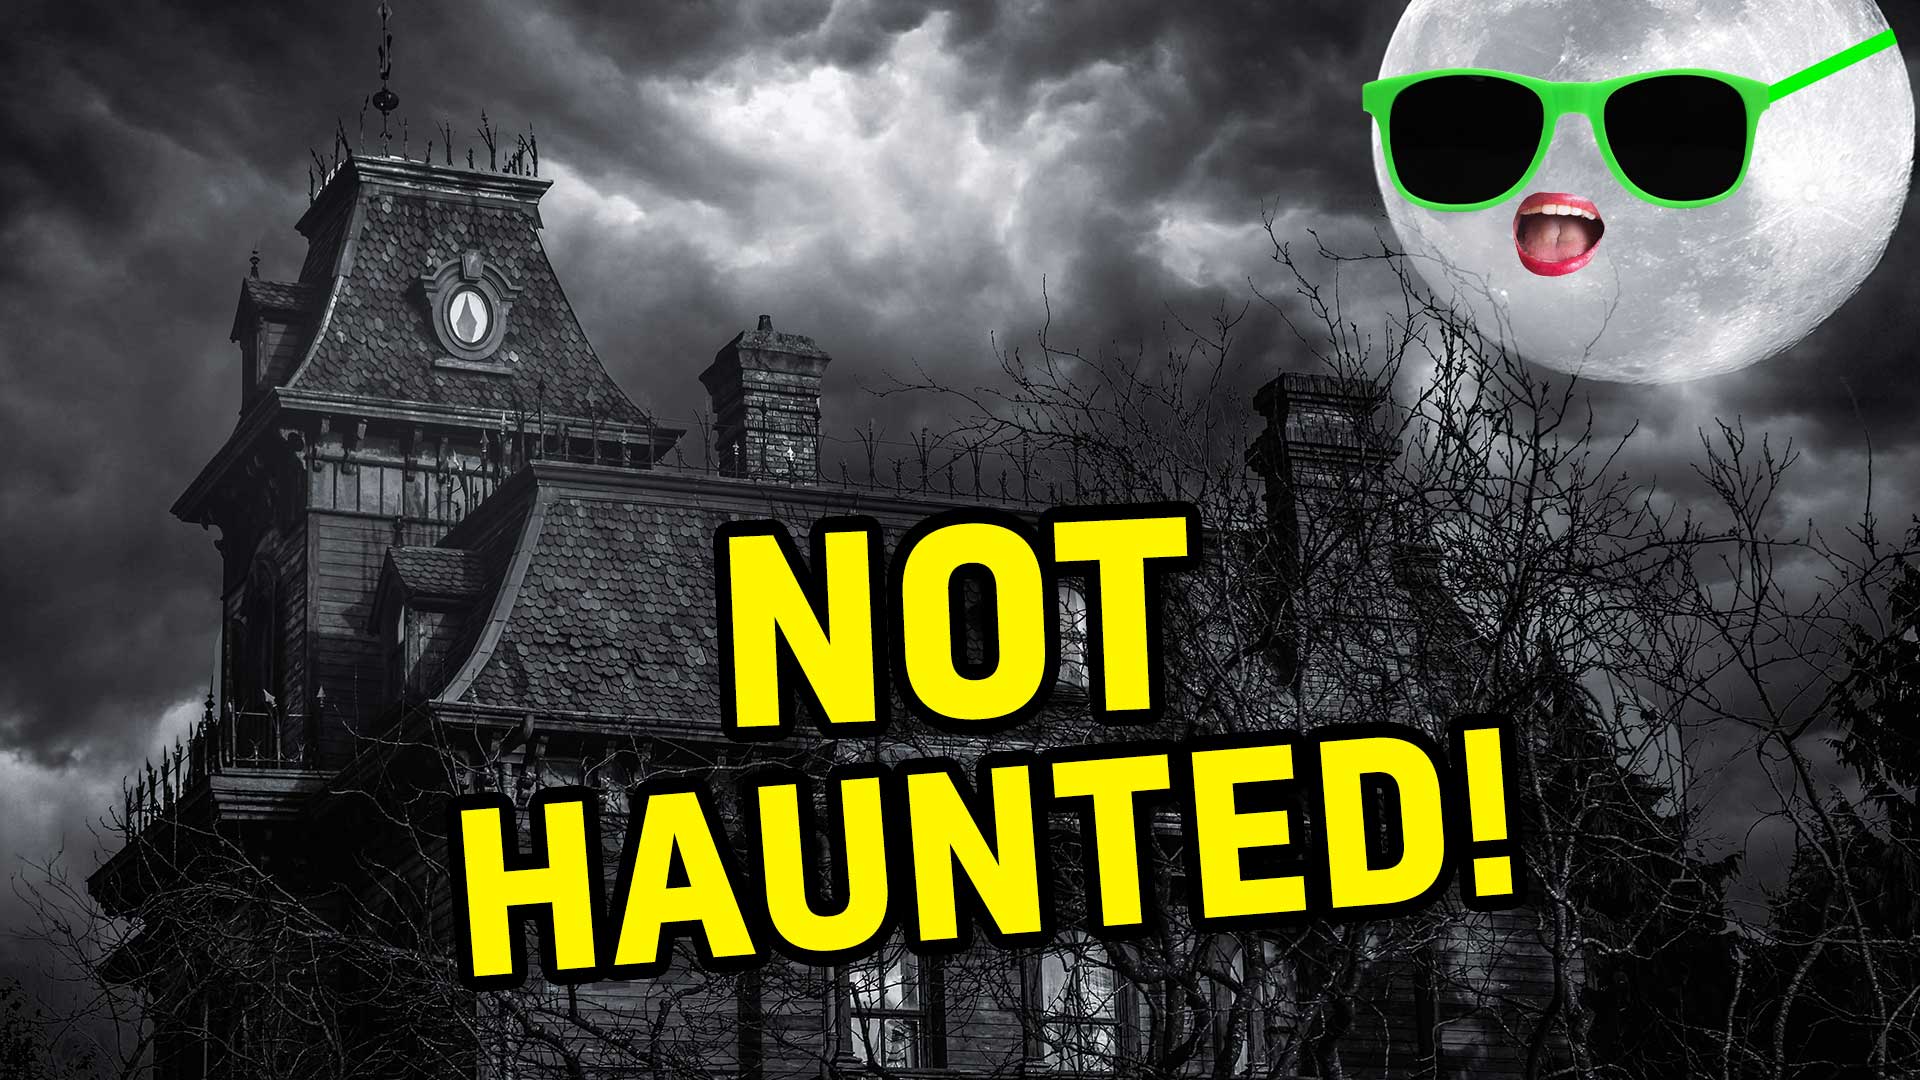 Your house is: NOT HAUNTED!